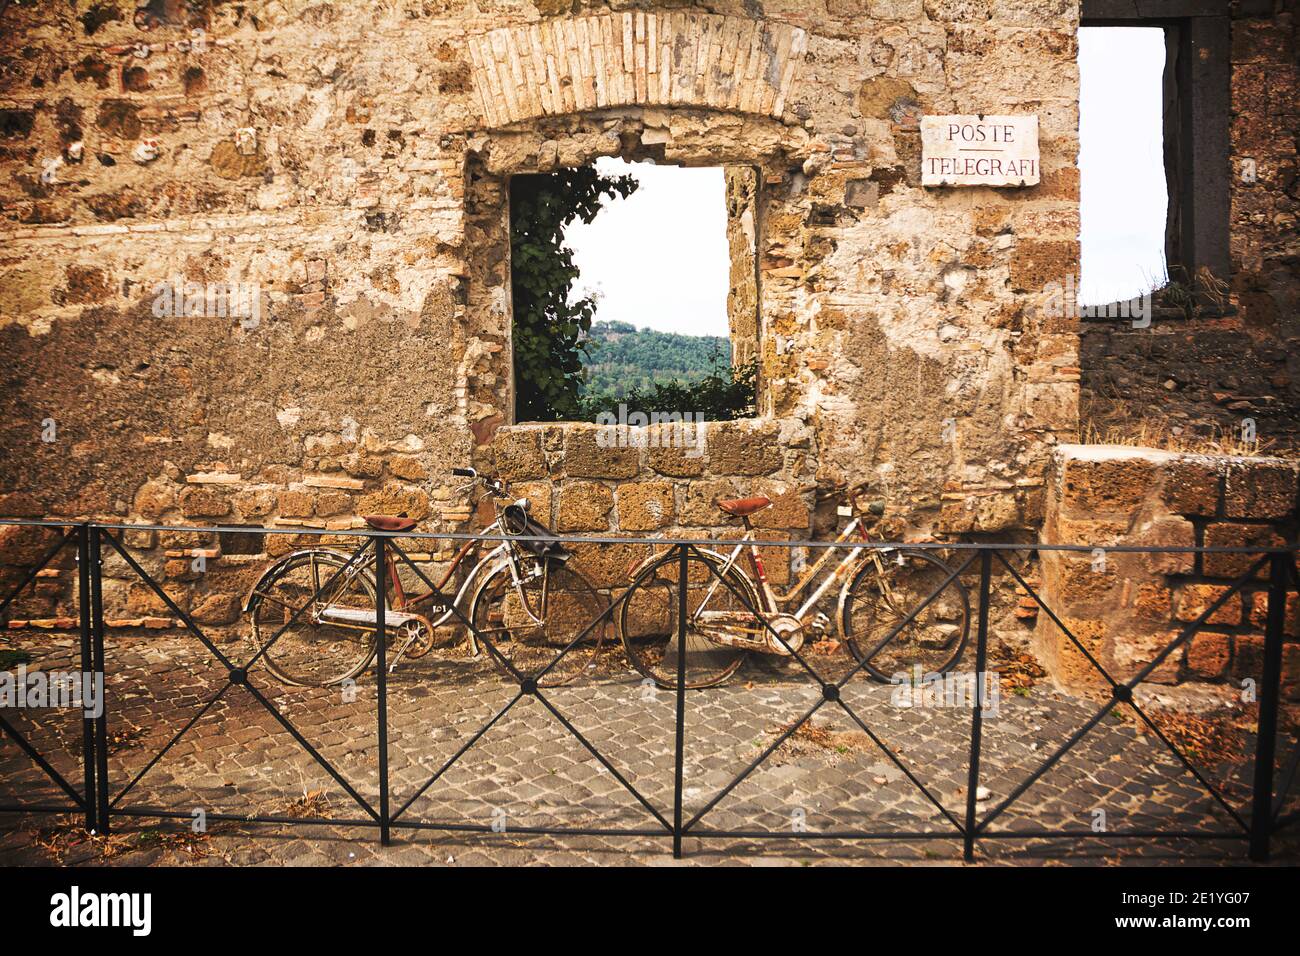 Old bicycles leaning on the old wall with the inscription 'Poste e Telegrafi' (Mail e Telegraph) Stock Photo